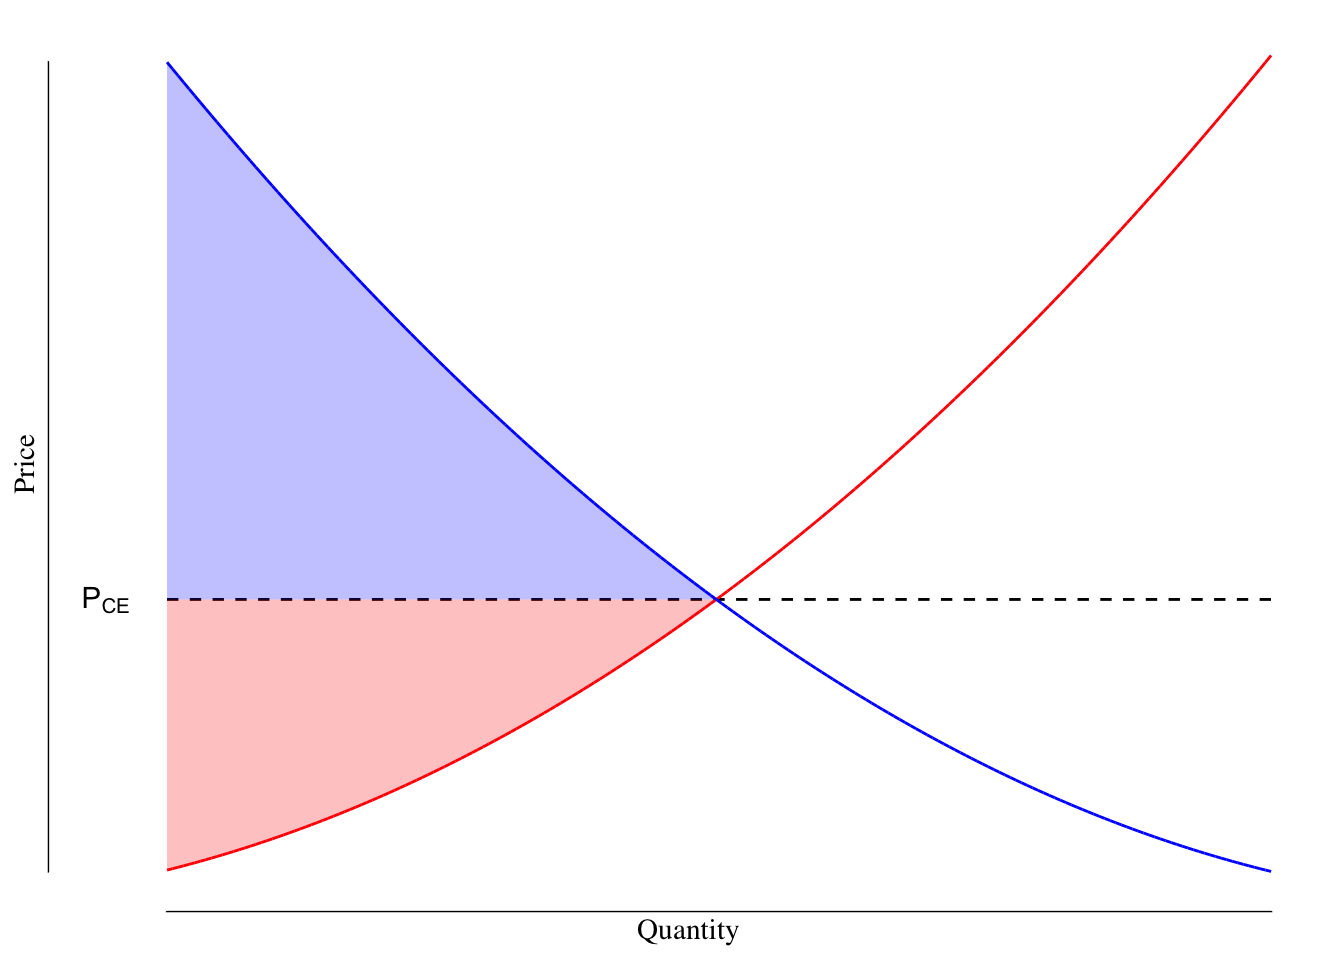 Supply, Demand, and Surplus. The sum of the red and blue shaded areas is the total social surplus in this market.